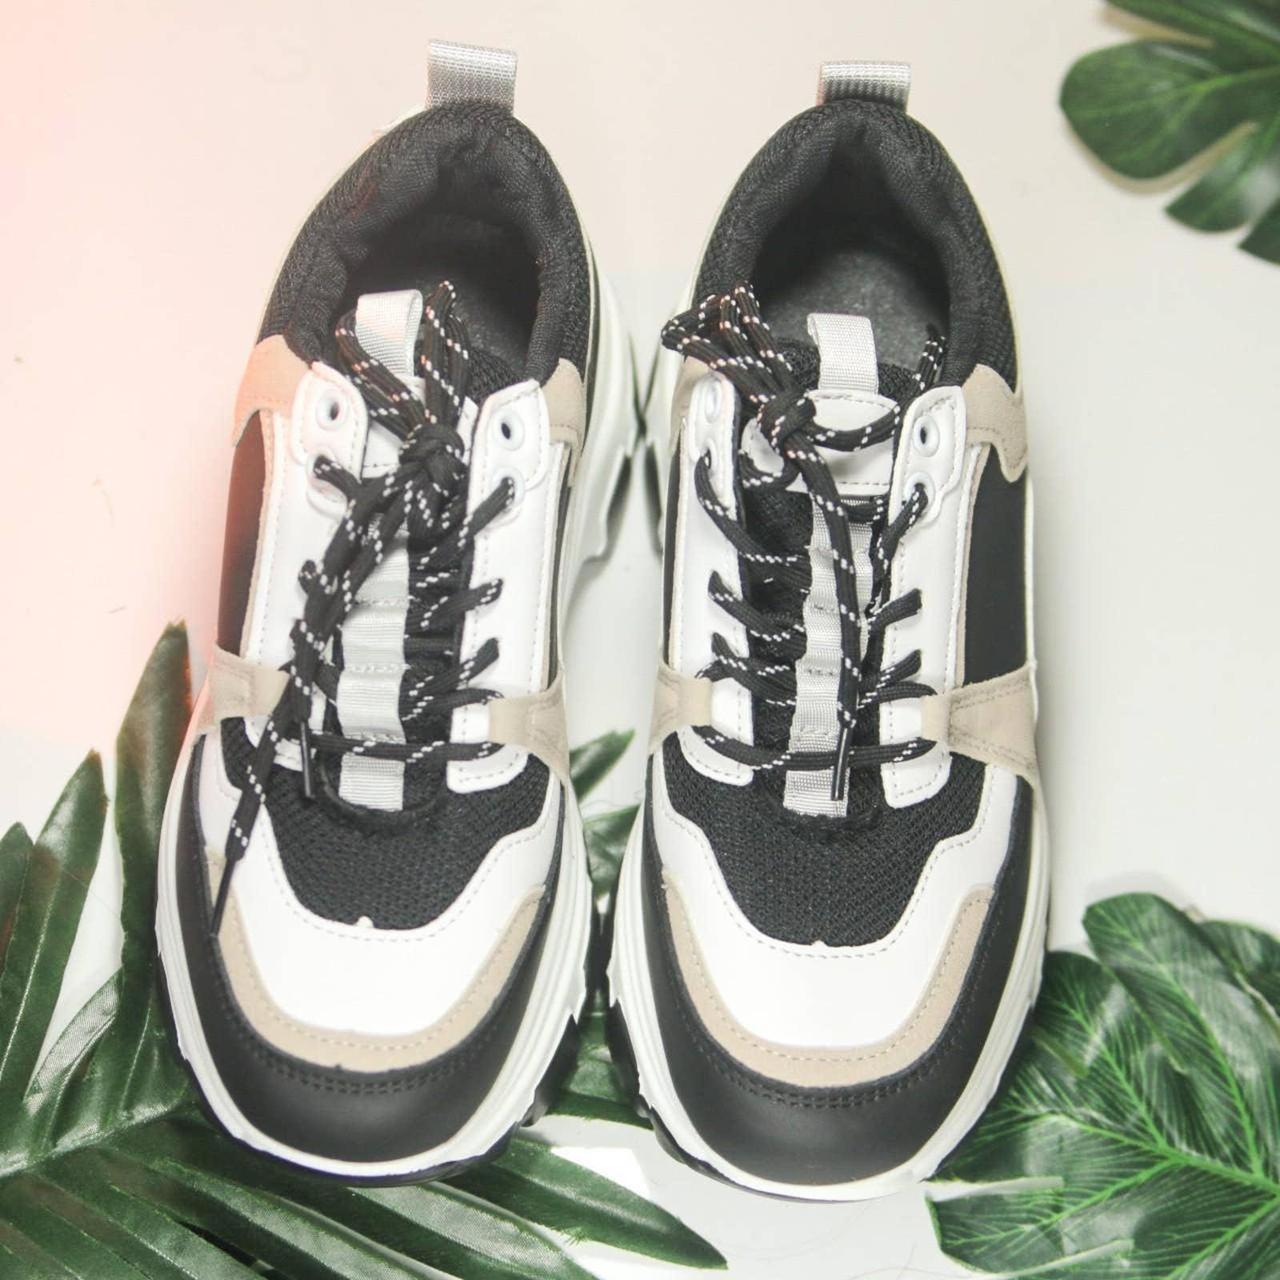 Product Image 3 - Name: Chunky Womens Platform Sneakers